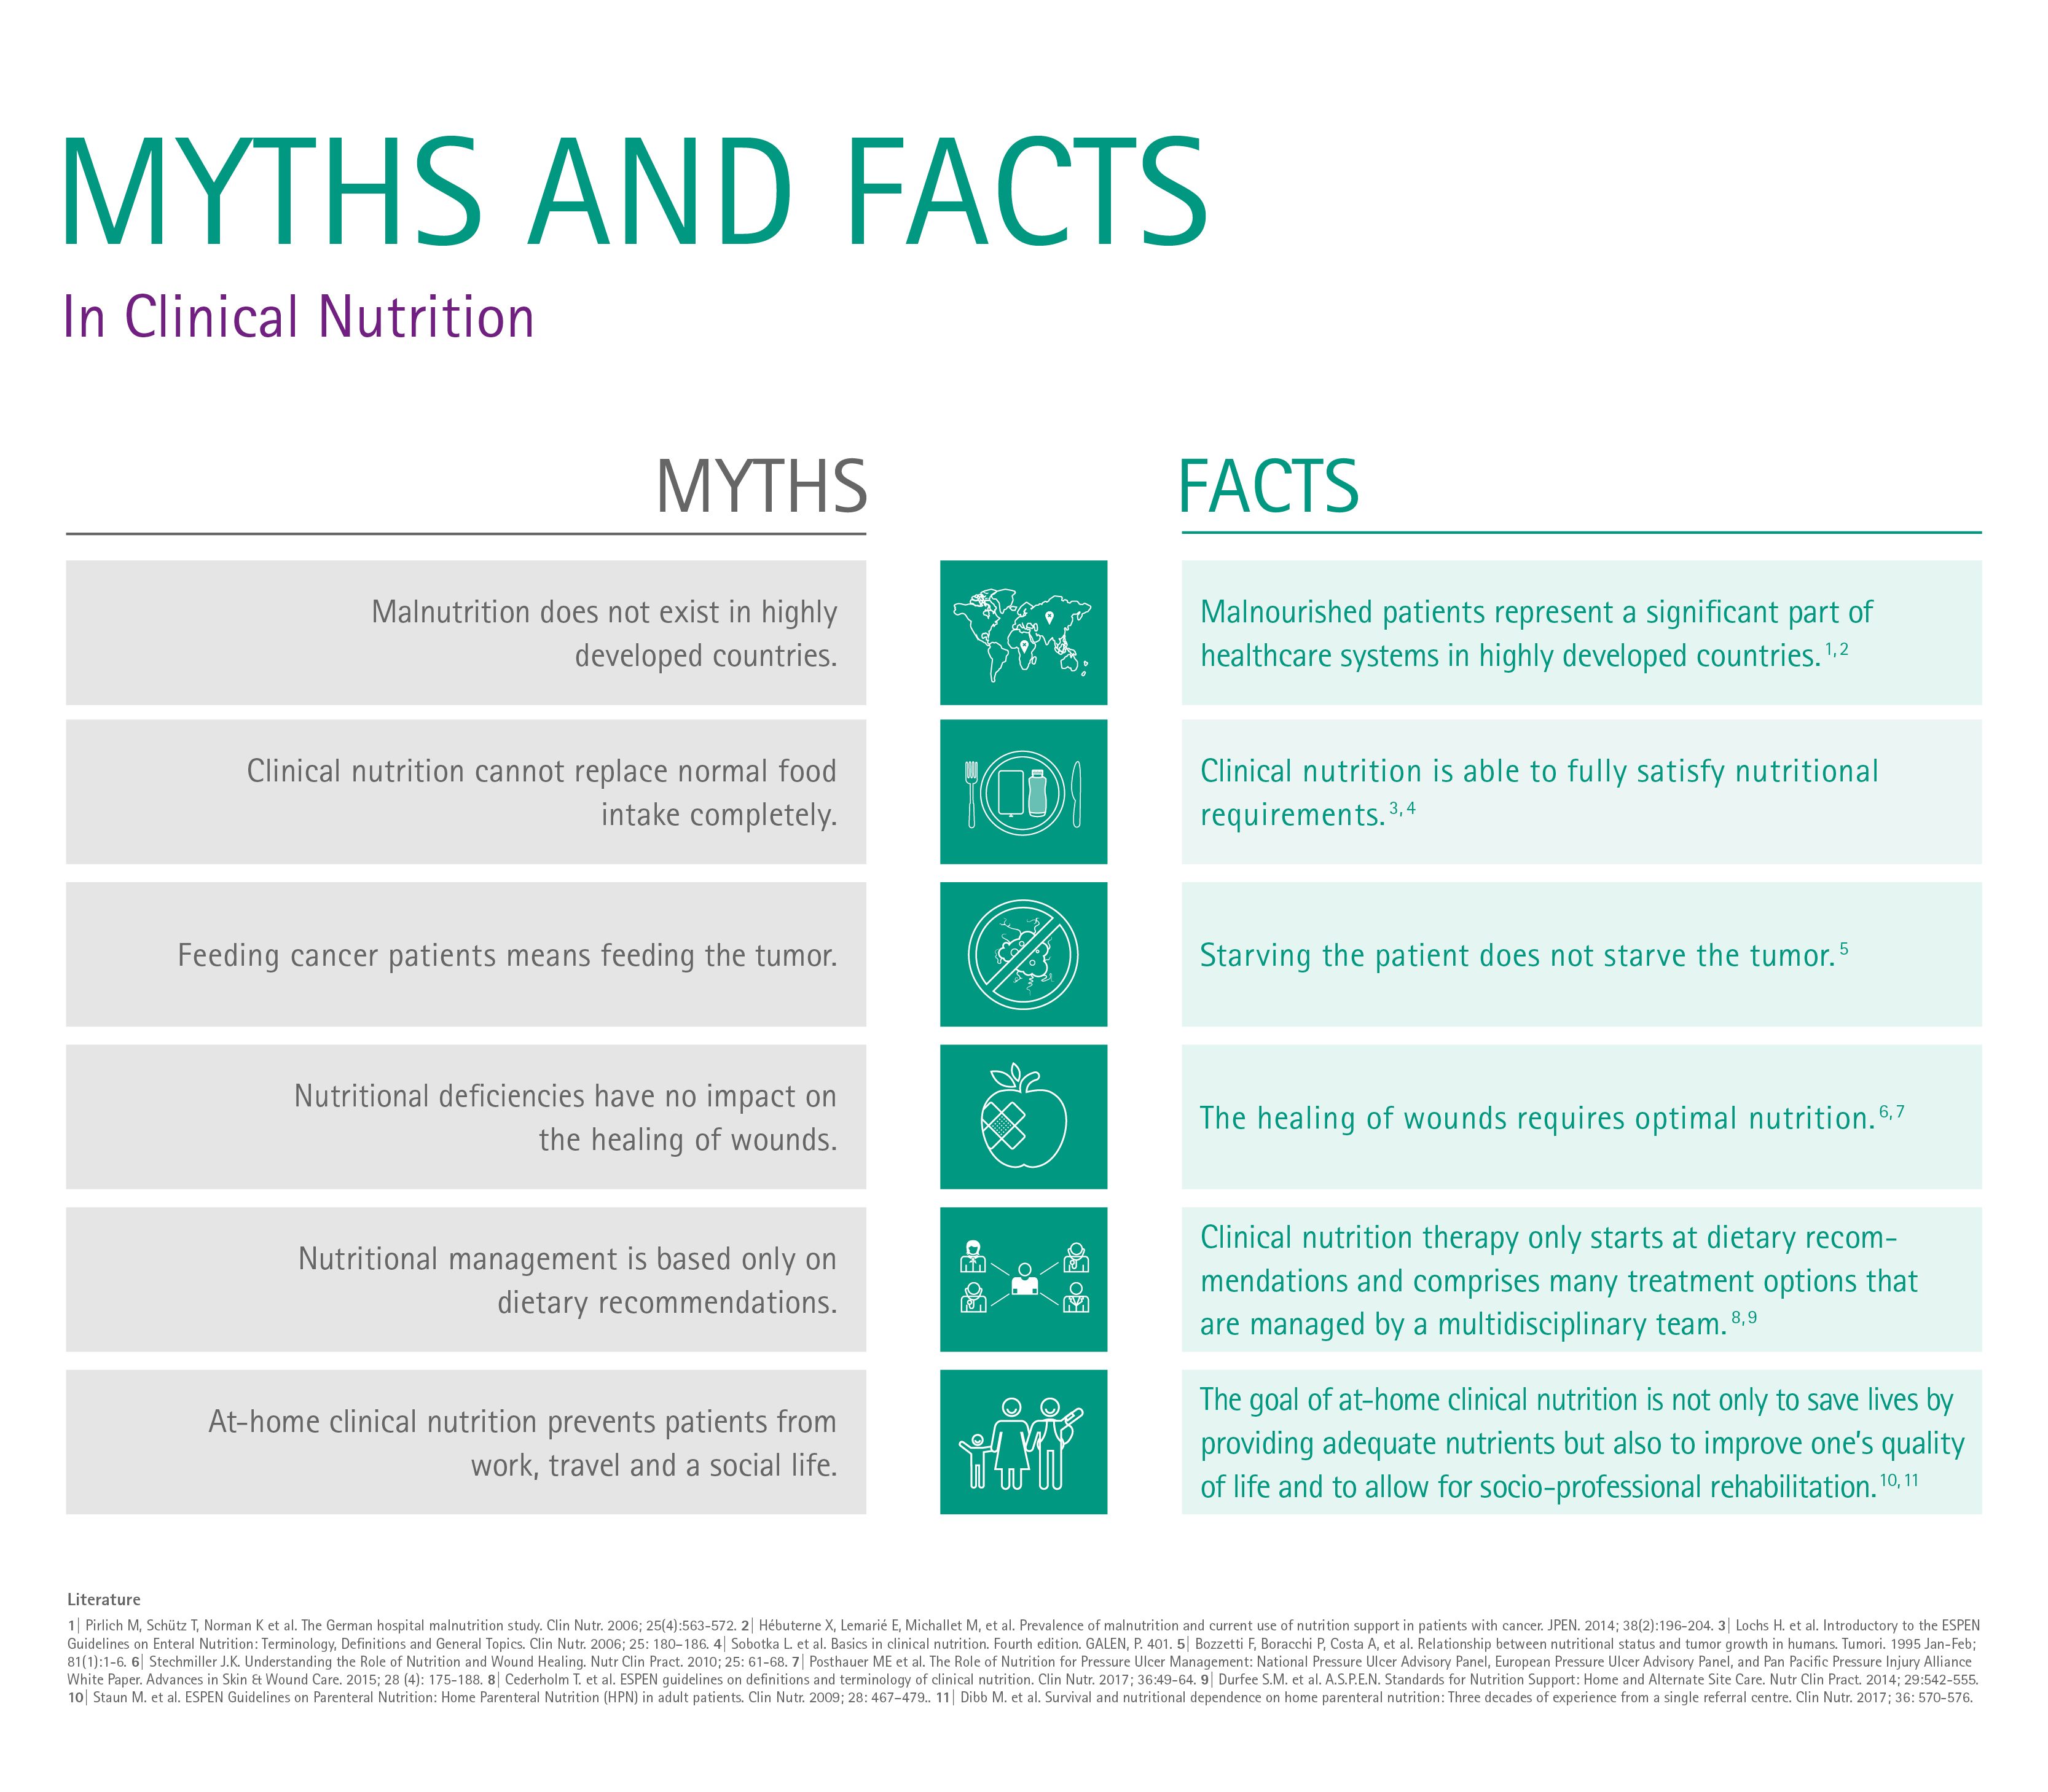 Myths about clinical nutrition